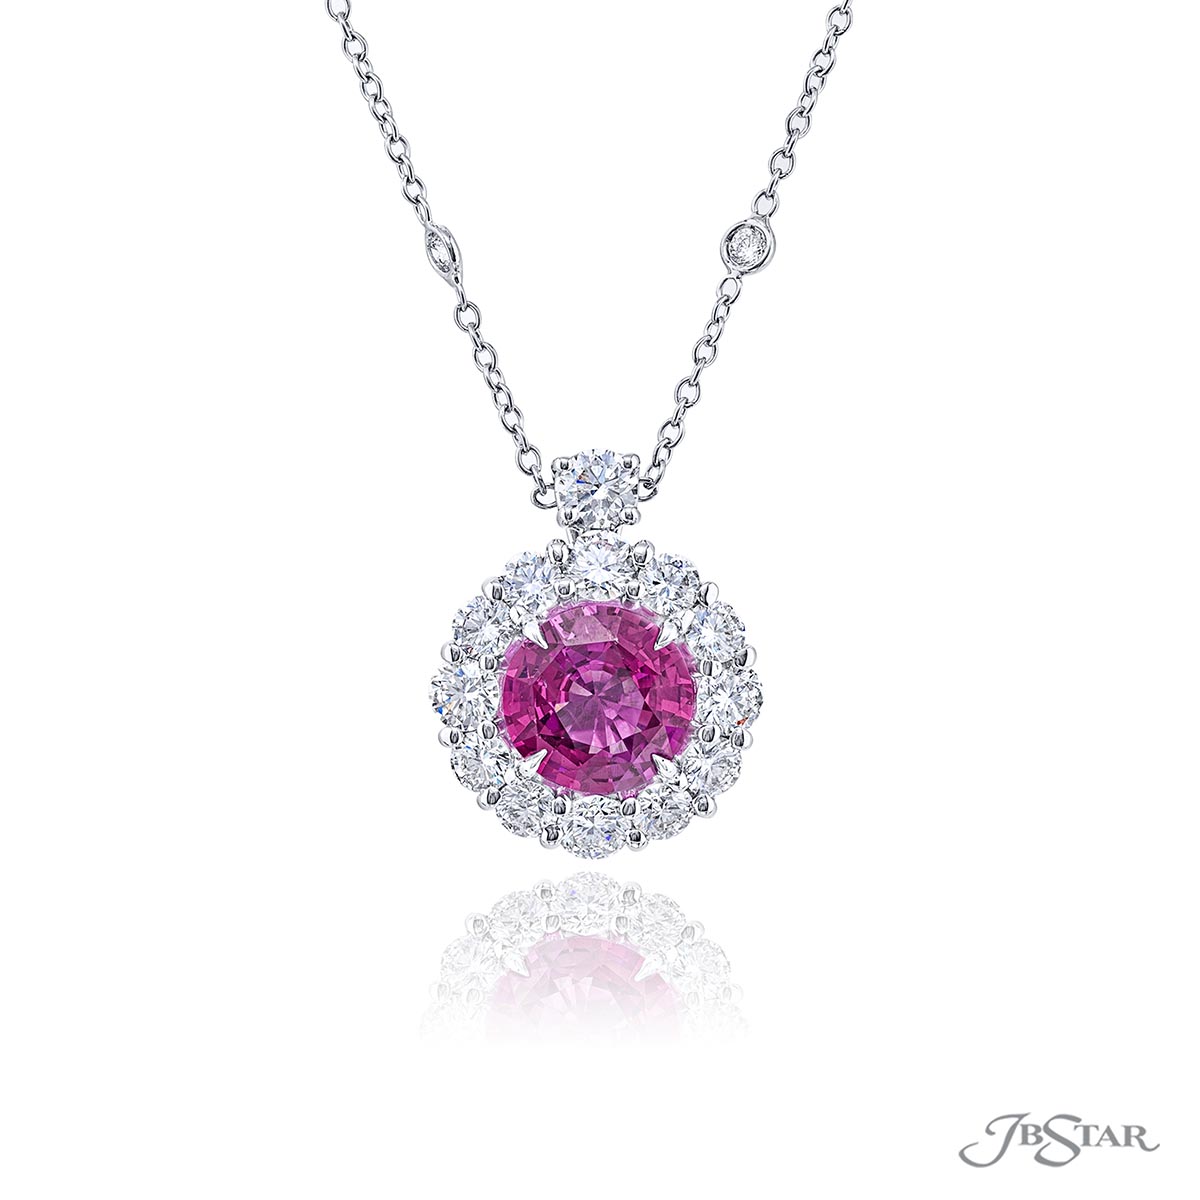 Natural Pink Sapphire Necklace, 1.19 Carat Round Faceted Gemstone Neck